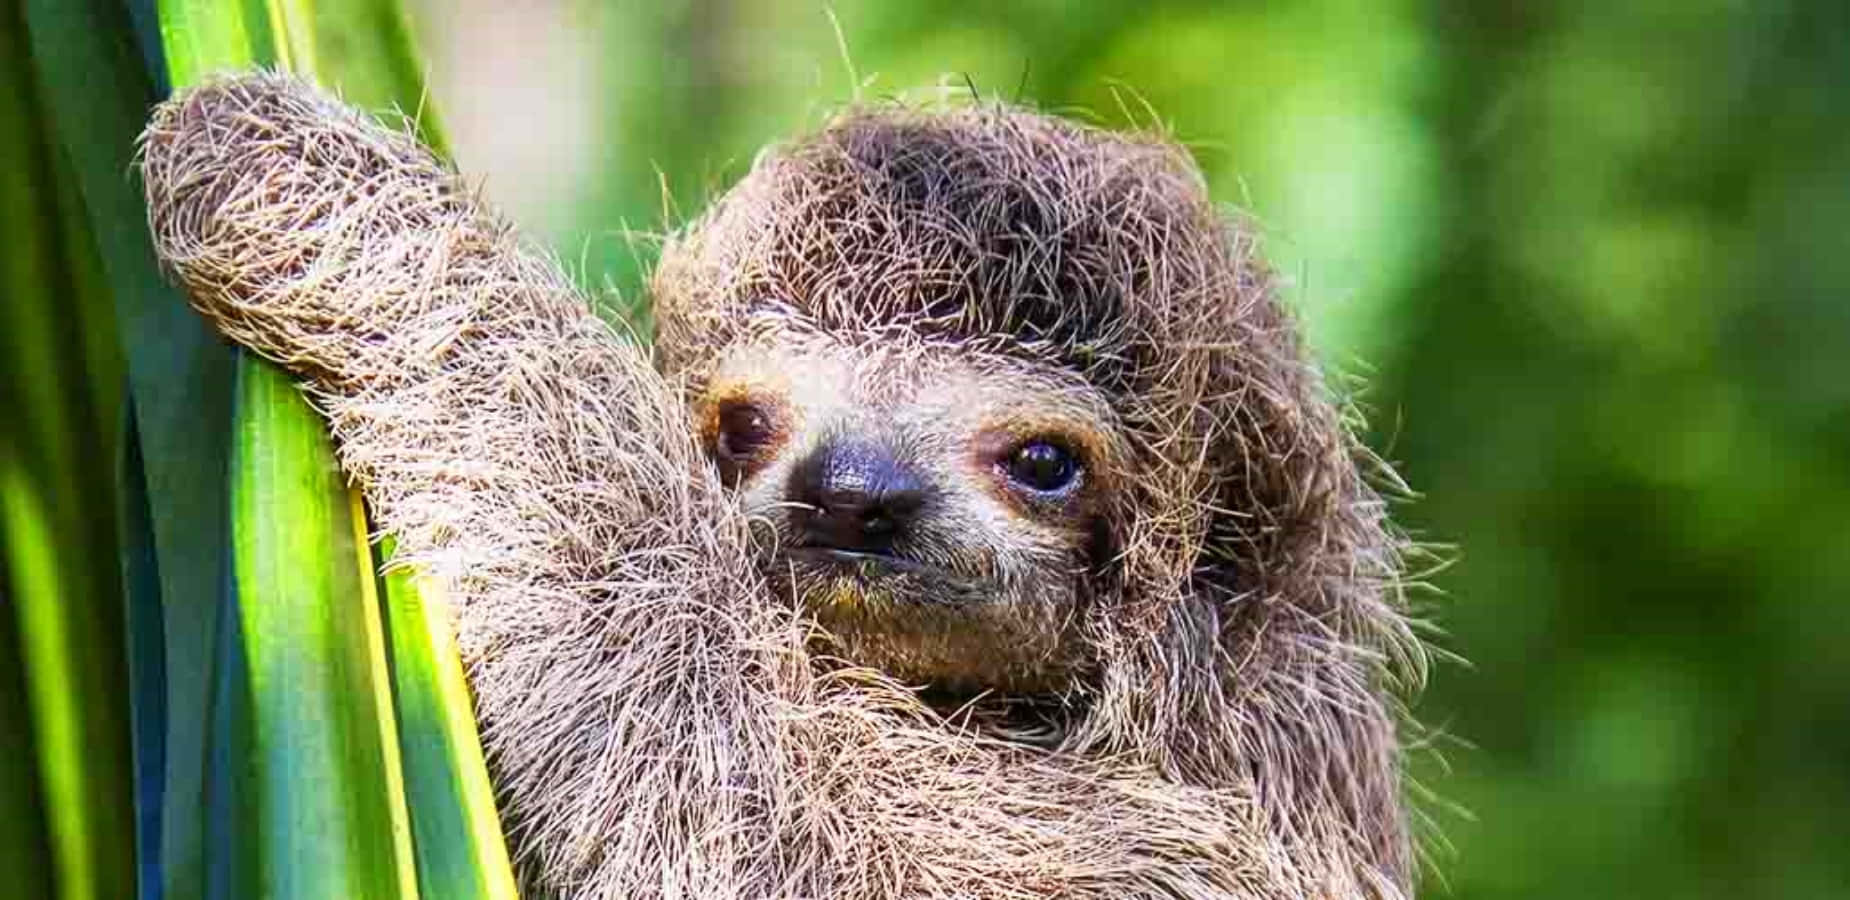 Cute Sloth Hanging On Leaves Picture